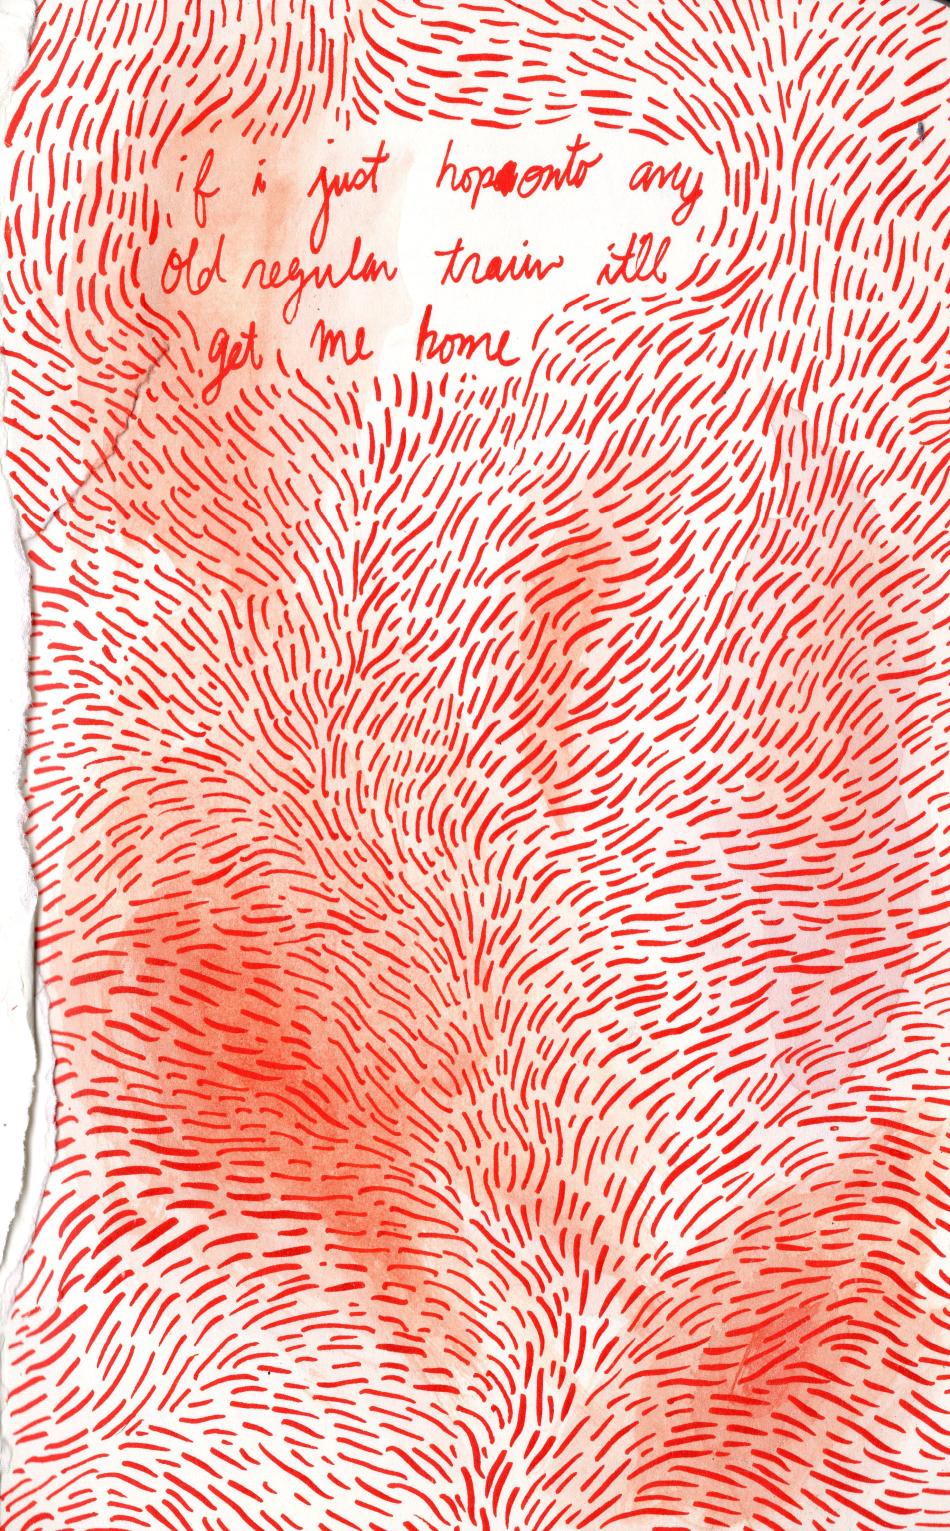 The image is a piece of illustrative artwork. The work is a drawing of red marker on white paper. The paper has frayed edges. The image consists of hundreds of red lines, arranged in a pattern not unlike hair. Short, imperfect red lines flow in a multitude of directions. Towards the top of the image, there is a clearing of red lines, big enough to fit a handwritten cursive message. The message reads "if i just hop onto any old regular train it'll get me home."